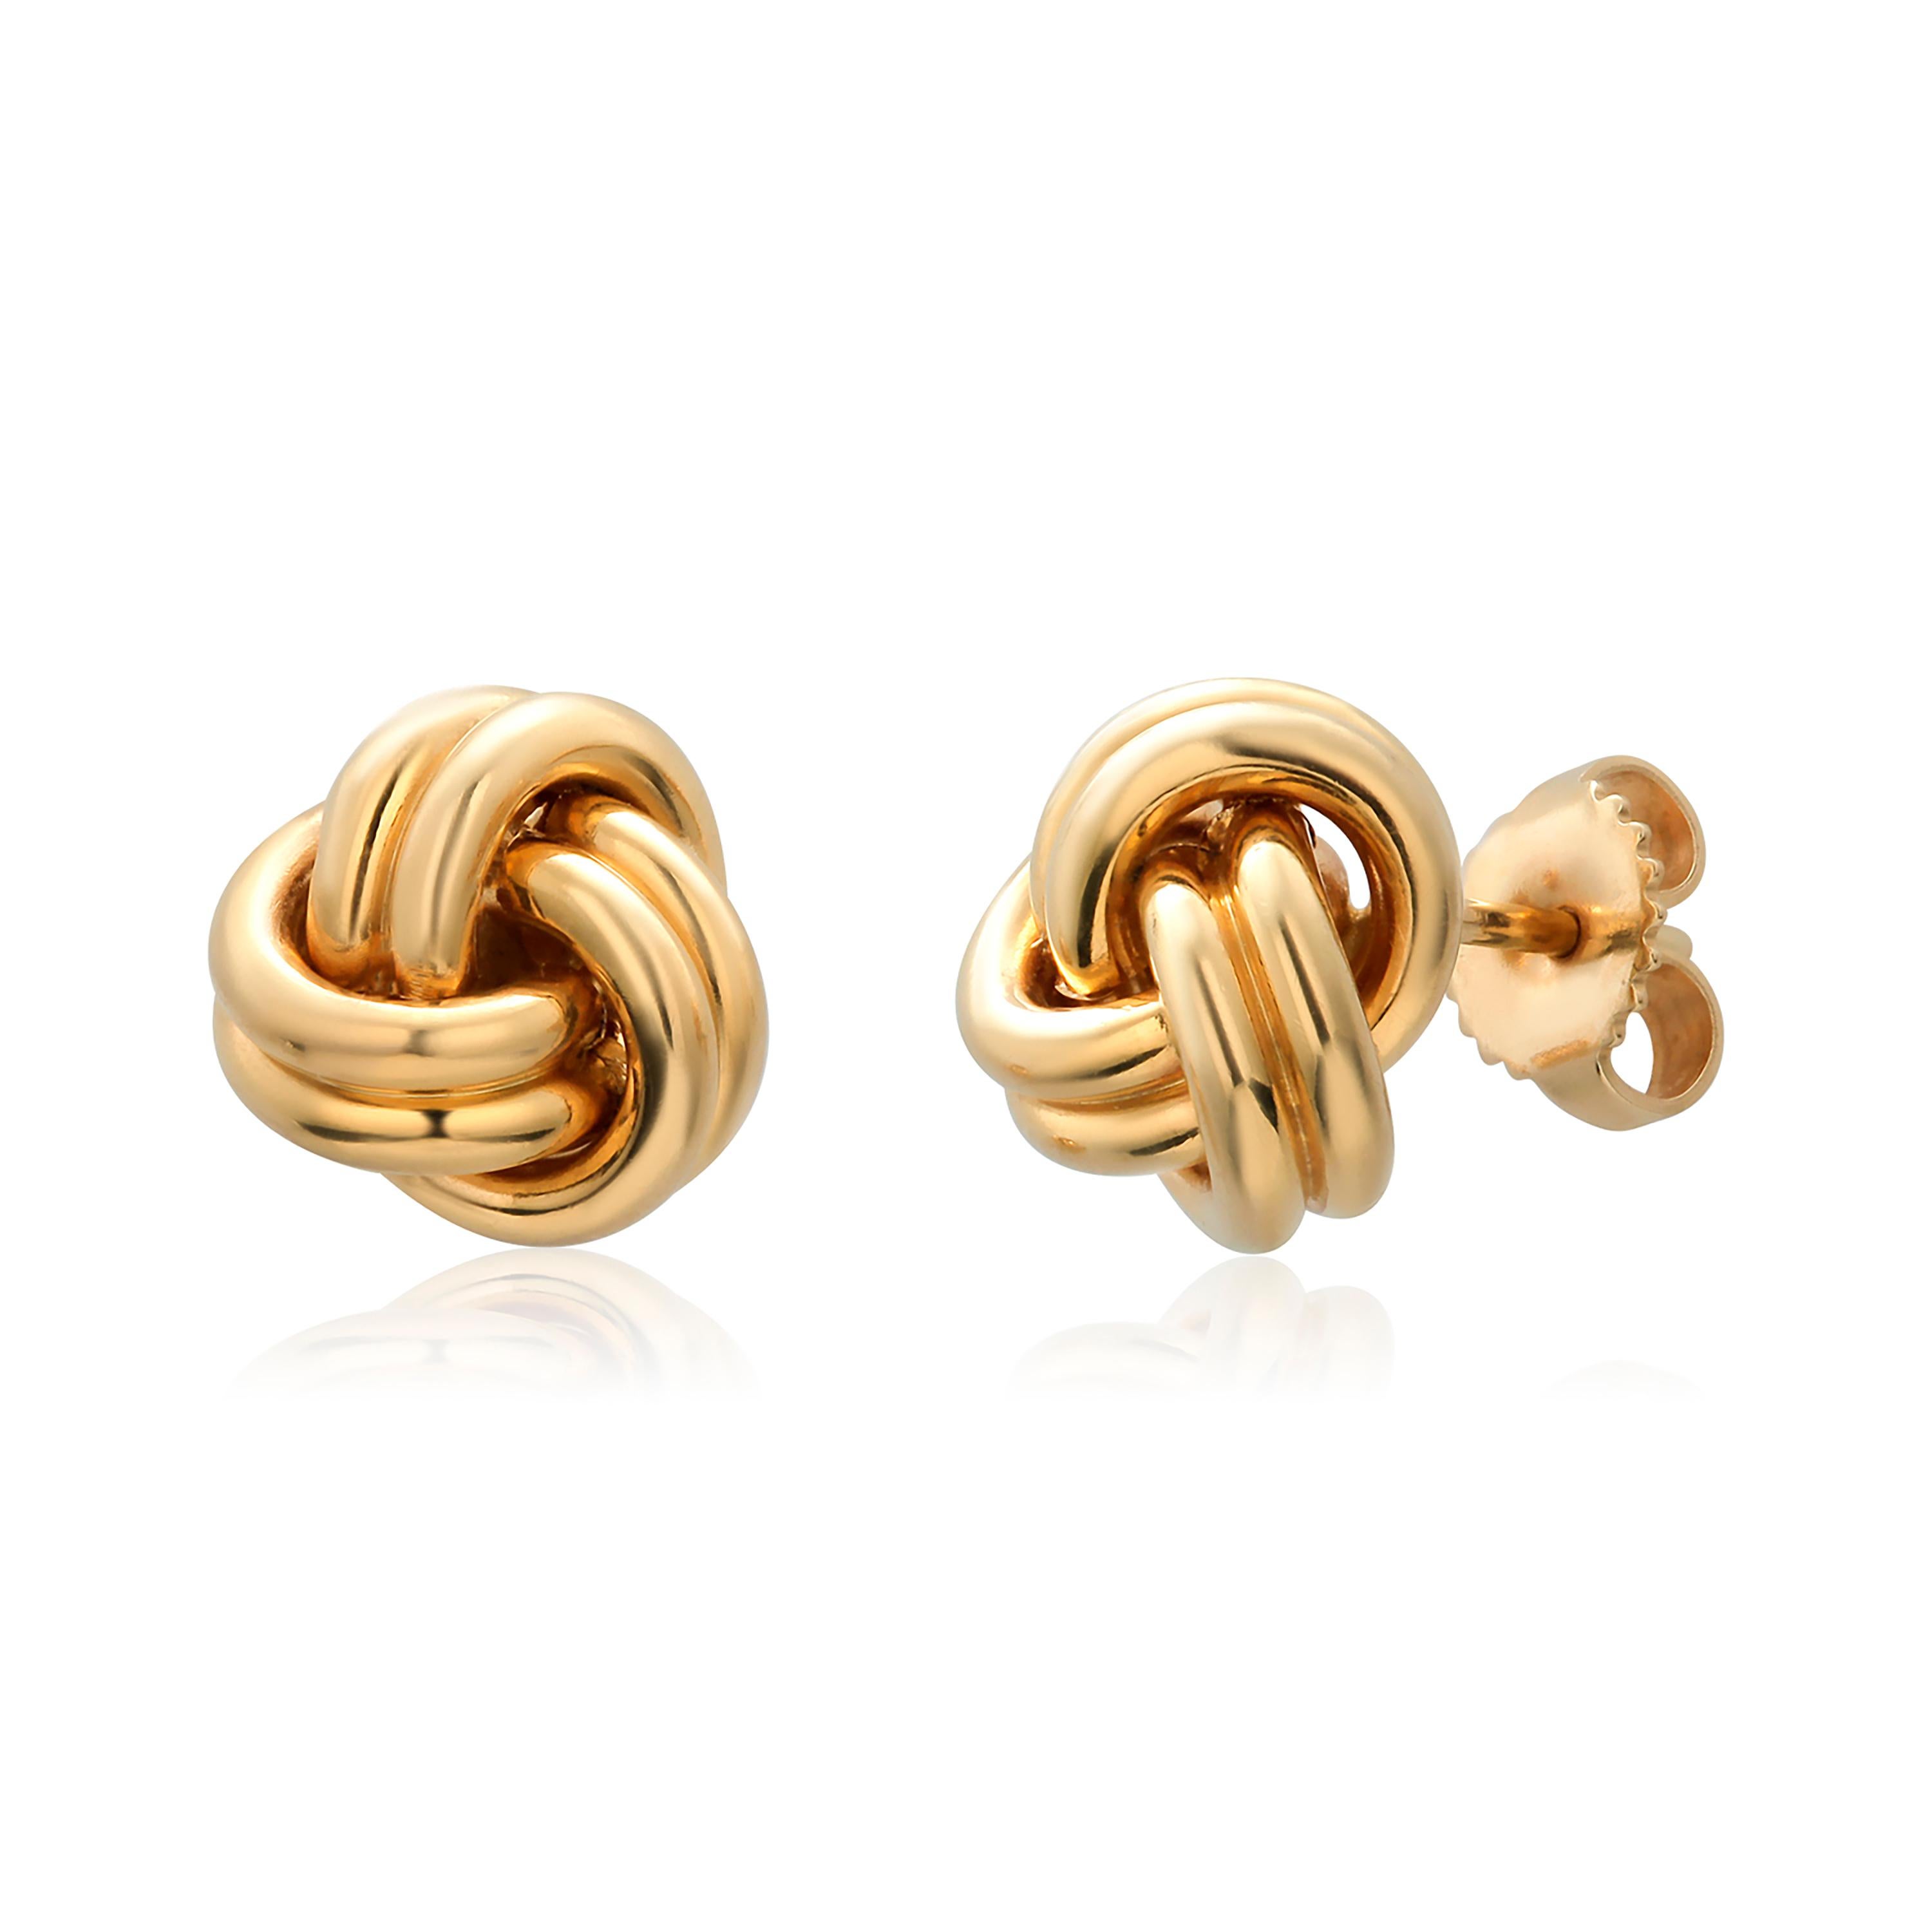 Contemporary Tiffany and Co Eighteen Karat Gold Knot Stud Earrings